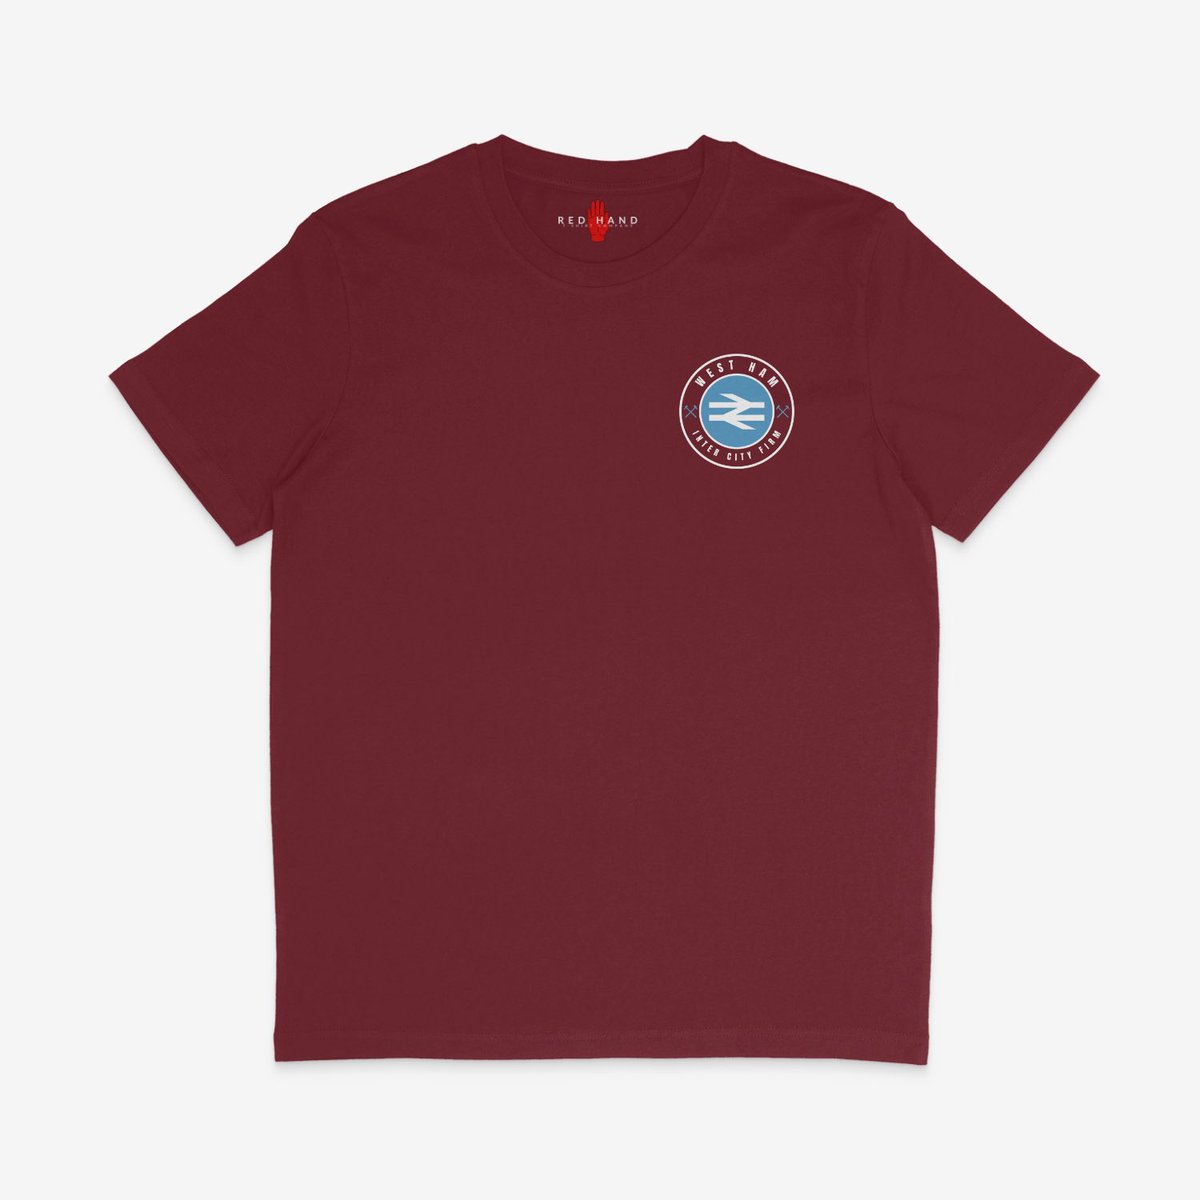 New T-shirts in the East London collection ⚒️🇬🇧🚂

redhandtshirtcompany.com/collections/ea…

#westhamunited #icf #westhamicf #intercityfirm